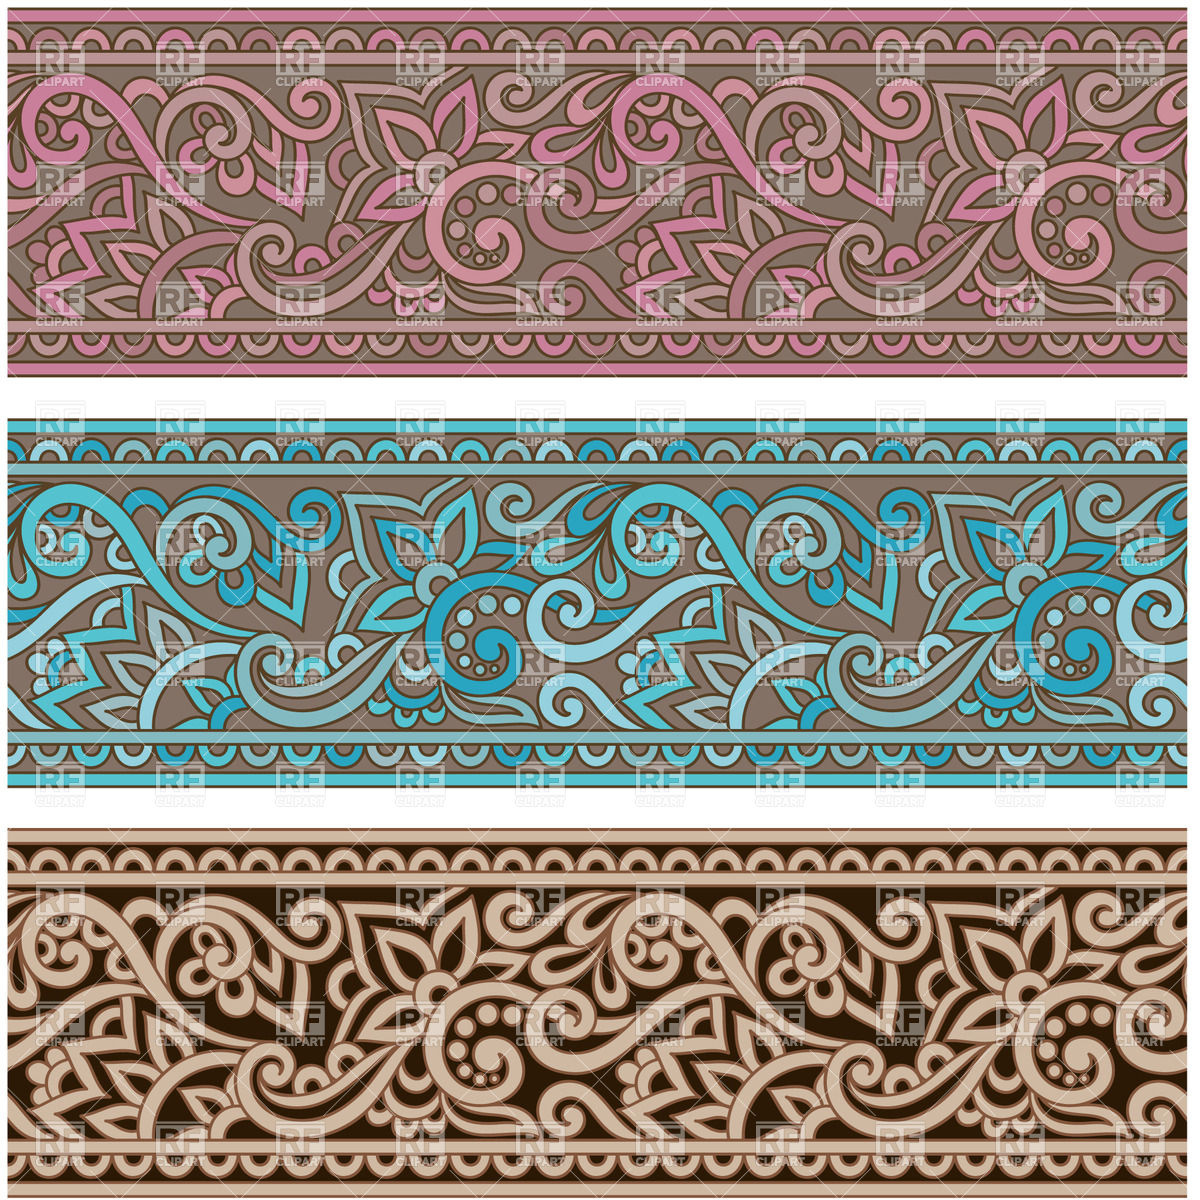 Ornate Oriental Borders Download Royalty Free Vector Clipart  Eps